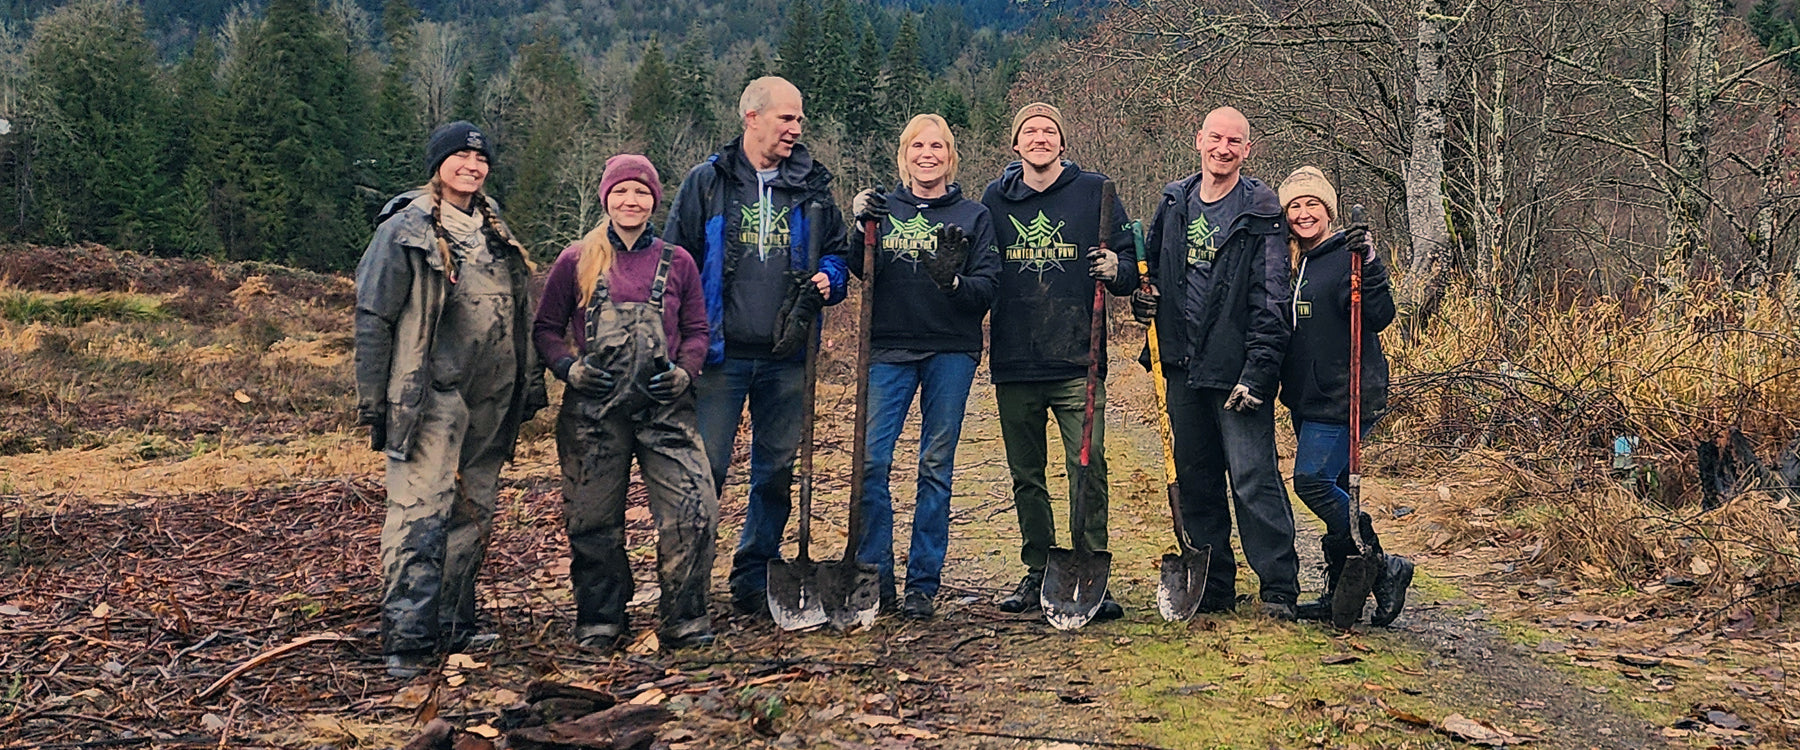 PNW KYNE with the Sound Salmon Solutions crew after planting trees